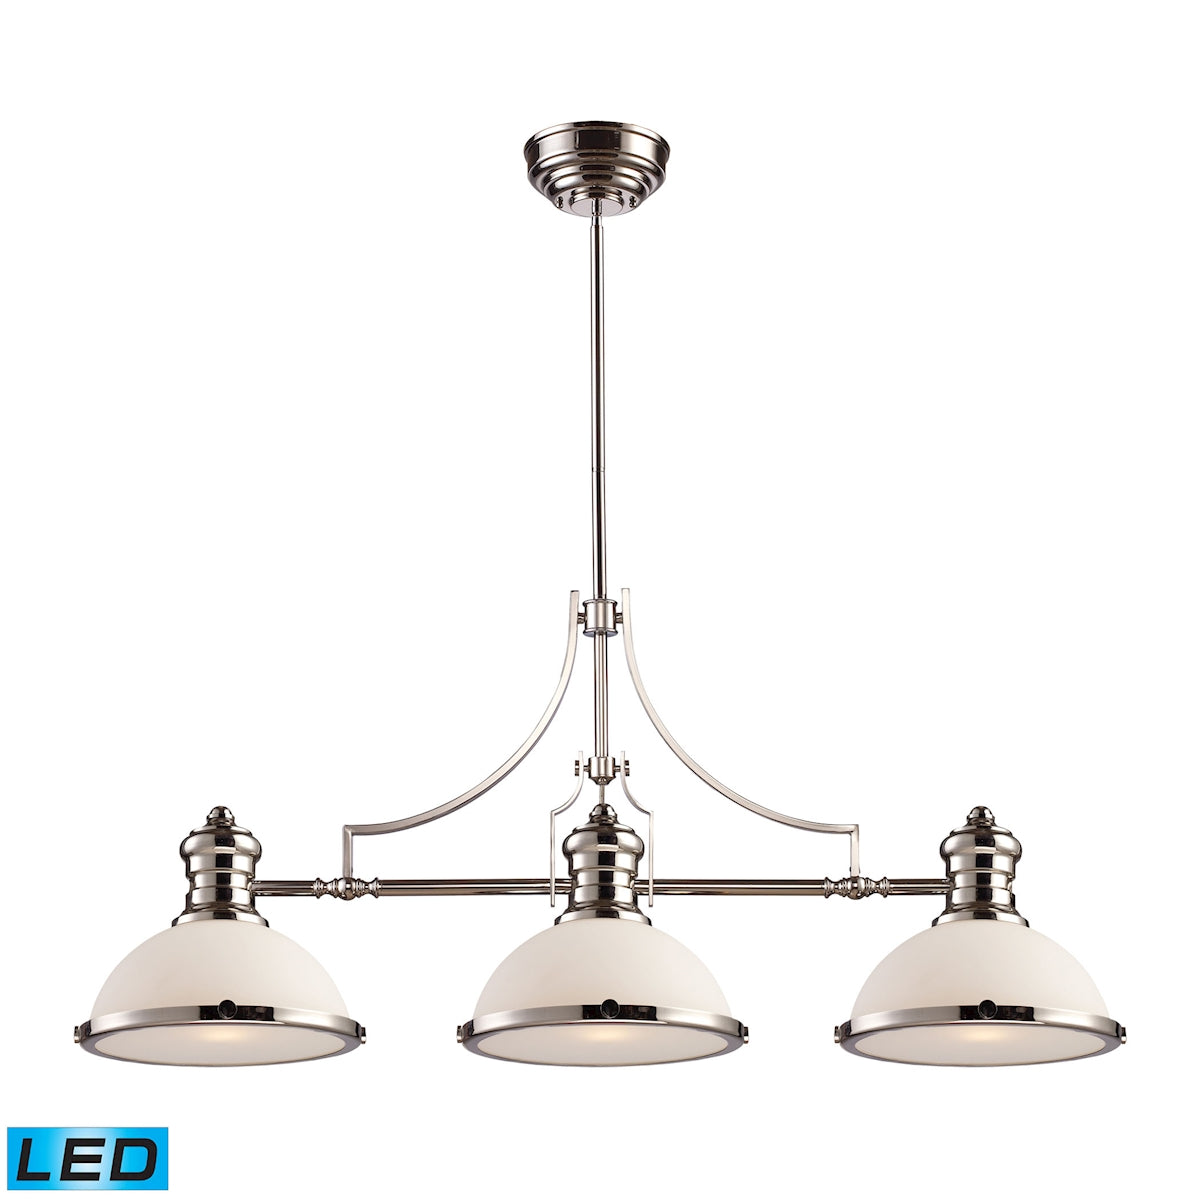 ELK Lighting 66215-3-LED Chadwick 3-Light Island Light in Polished Nickel with Gloss White Shade - Includes LED Bulbs